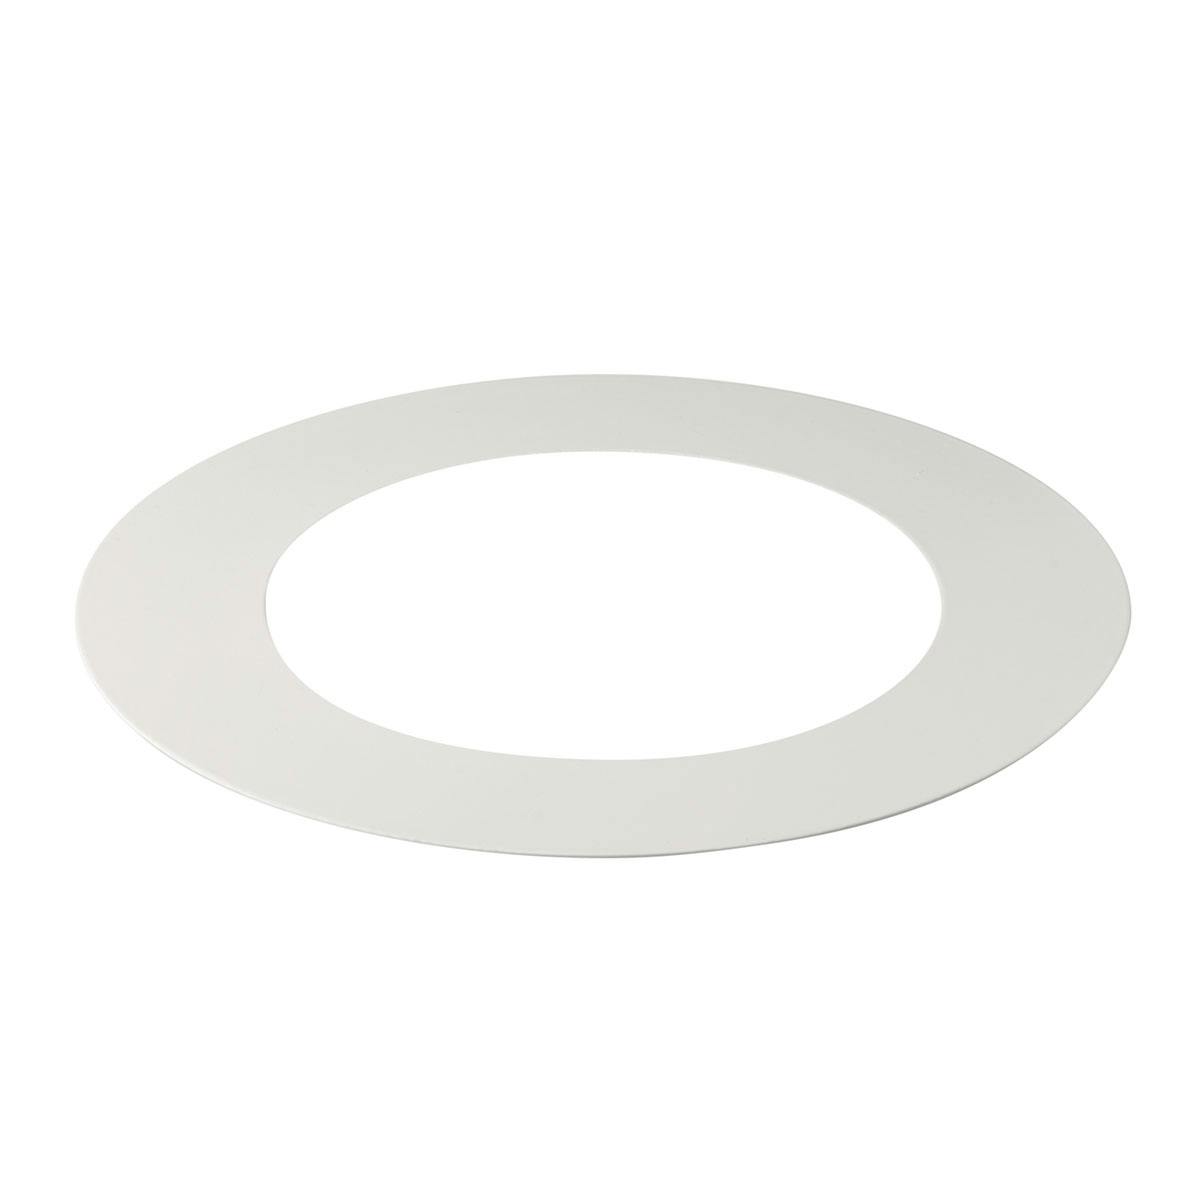 Direct to Ceiling Unv Accessor Goof Ring DLGR06BWH